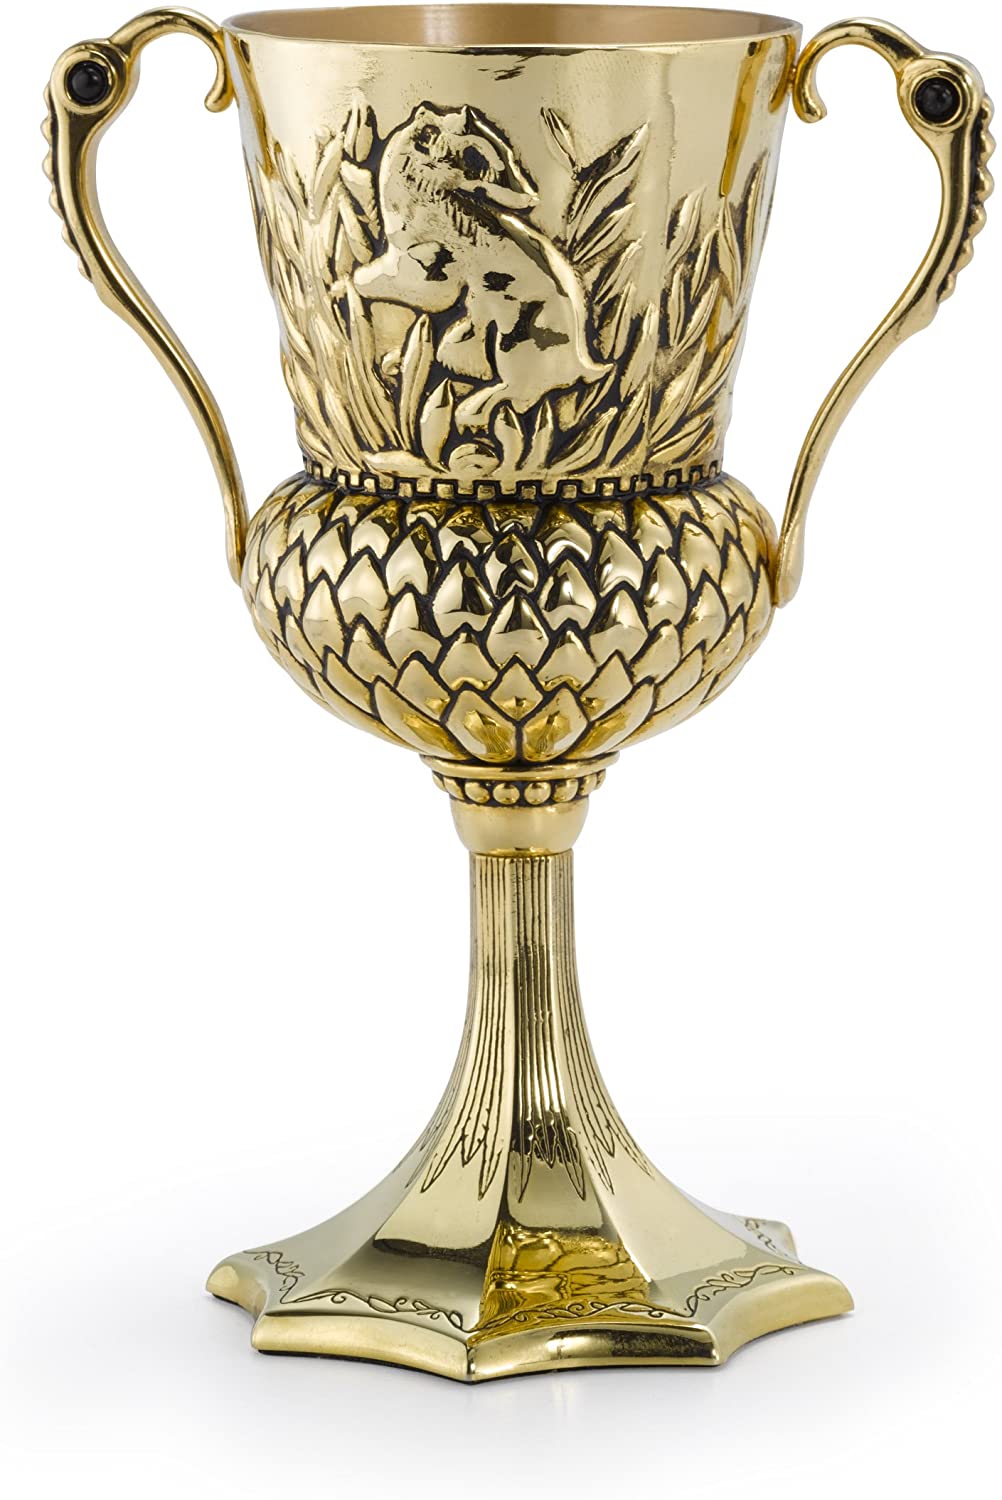 The Noble Collection: Harry Potter Hufflepuff Cup | Harry Potter gift ideas | cool Harry Potter gift ideas | magical Harry Potter gift ideas | cute Harry Potter gift ideas | what to gift a harry potter fan | what is the best gift for a harry potter fan | the ultimate harry potter gift | the best harry potter gift ideas | harry potter gift for girl | harry potter gift for teacher | harry potter gift for kids | harry potter gift to buy | harry potter gift for adults | harry potter gift for him | harry potter gift for her | harry potter gift for boyfriend | harry potter gift for girlfriend | harry potter gift amazon | harry potter anniversary gift | harry potter gift bag ideas | harry potter gift box ideas | harry potter gift guide | harry potter official gift shop | harry potter gift set | Harry Potter gift guide | the best harry potter gift ideas | what to get someone who loves harry potter | harry potter hufflepuff gift ideas | harry potter Gryffindor gift ideas | harry potter Ravenclaw gift ideas | harry potter Slytherin gift ideas | harry potter graduation gift ideas | good harry potter gift ideas | great harry potter gift ideas | harry potter baby shower gift ideas | harry potter themed wedding gift ideas | unique harry potter gift ideas | harry potter valentines gift ideas | potterhead gift ideas | best potterhead gifts | cool potterhead gift ideas | Harry Potter gifts for men | Harry Potter gift box | Harry Potter gifts uk | harry potter gifts for tweens | harry potter gift basket | harry potter gift set | Harry Potter stocking stuffers | Harry Potter Christmas gifts | fantastic beasts gift guide